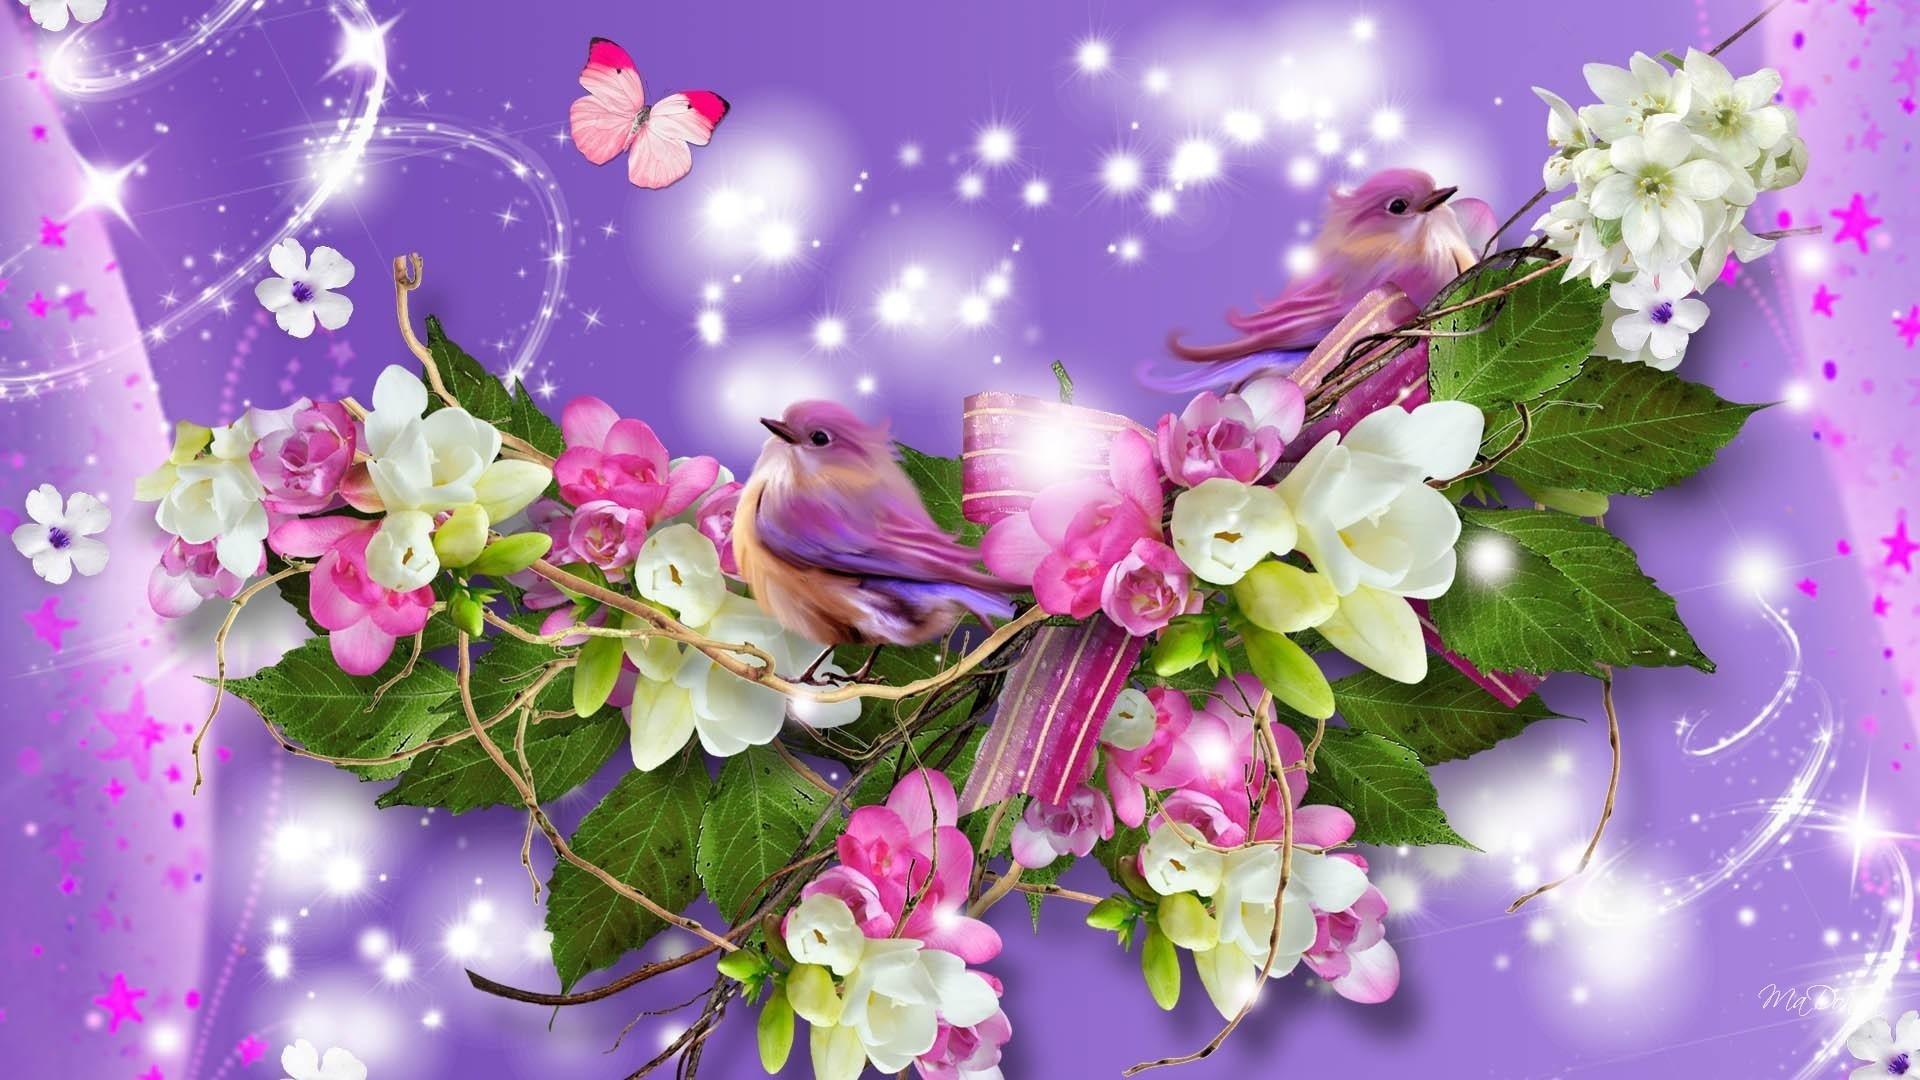 Bird, Flowers, and Butterfly HD Wallpaper. Background Image